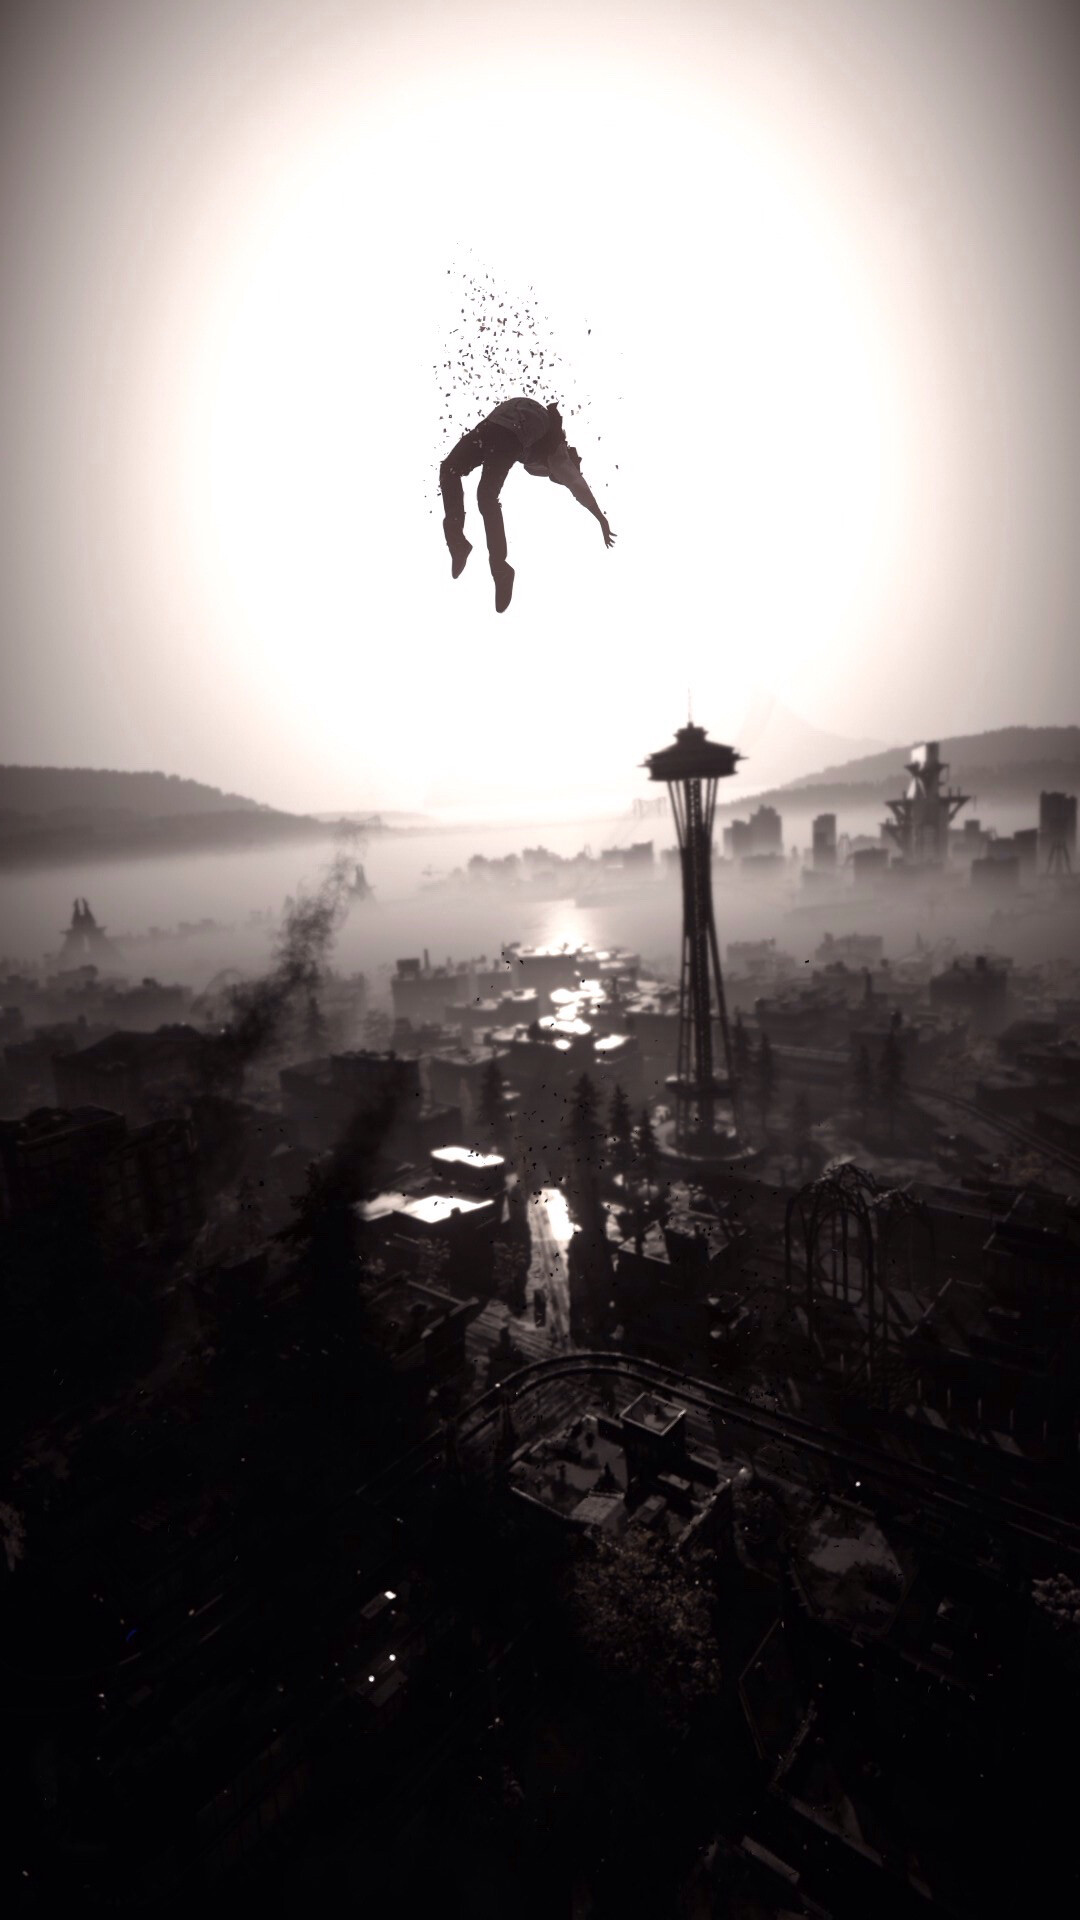 inFAMOUS: Second Son, A PlayStation 4 exclusive, An action adventure game. 1080x1920 Full HD Wallpaper.